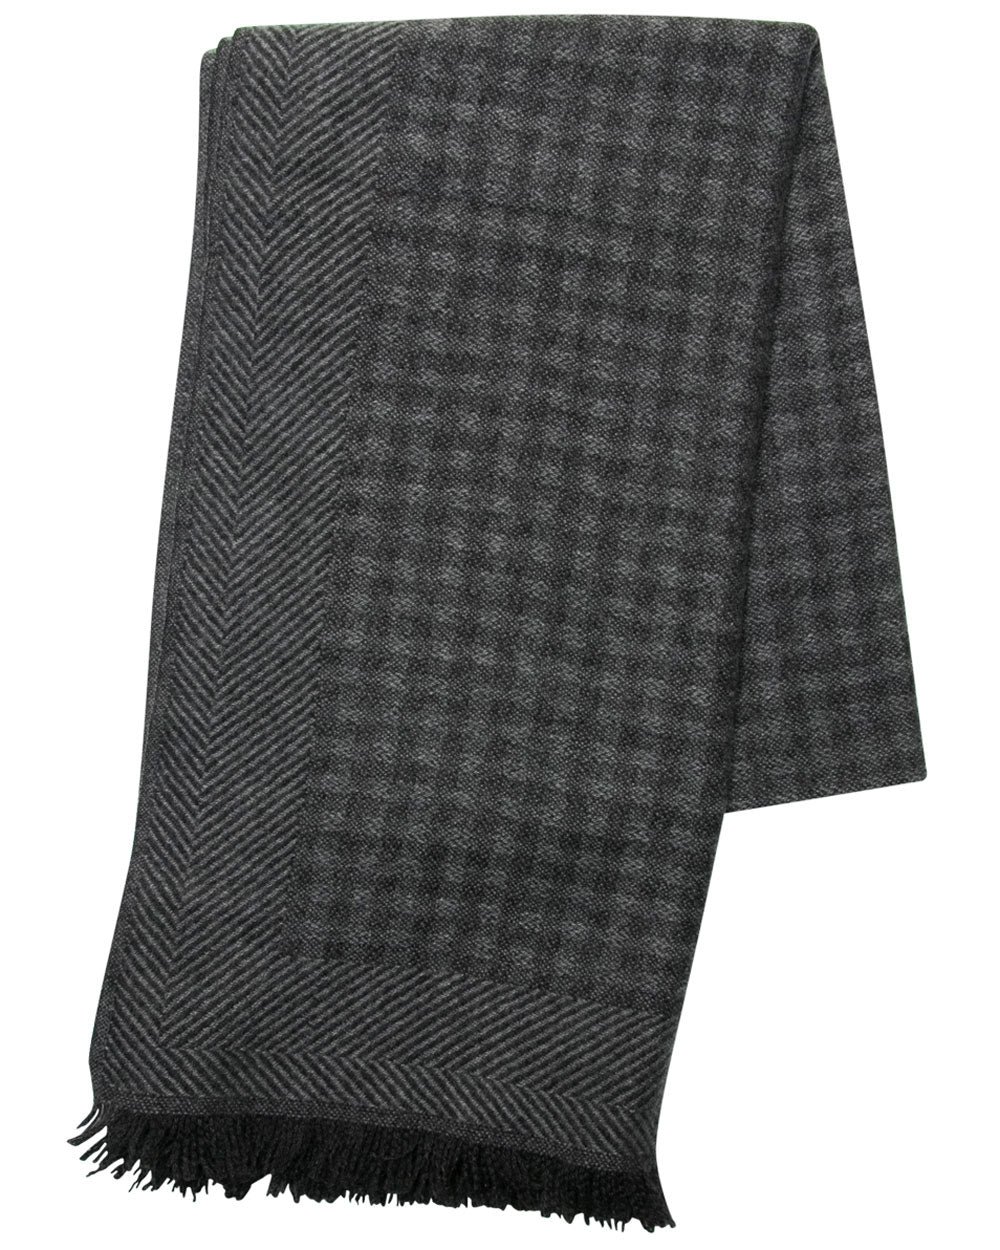 Black and Grey Checkered Cashmere Scarf